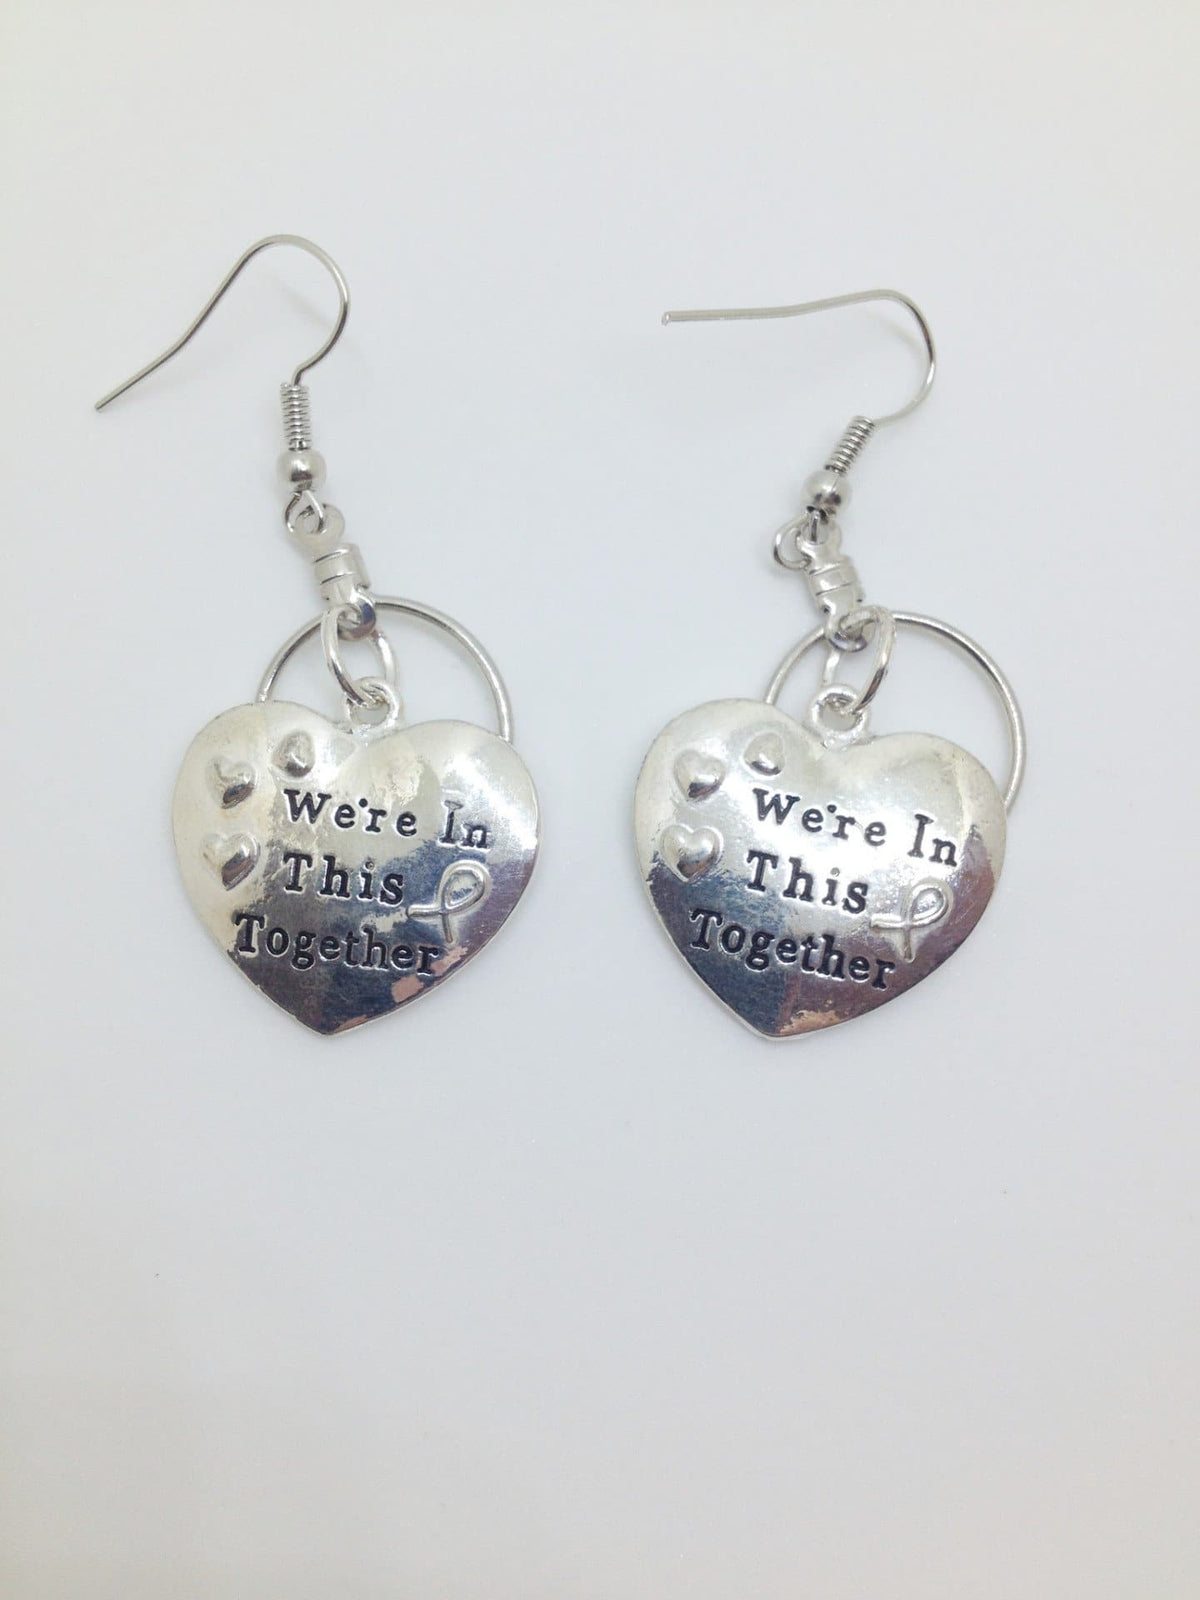 We're In This Together Small Hooped Earrings for Autism - The House of Awareness